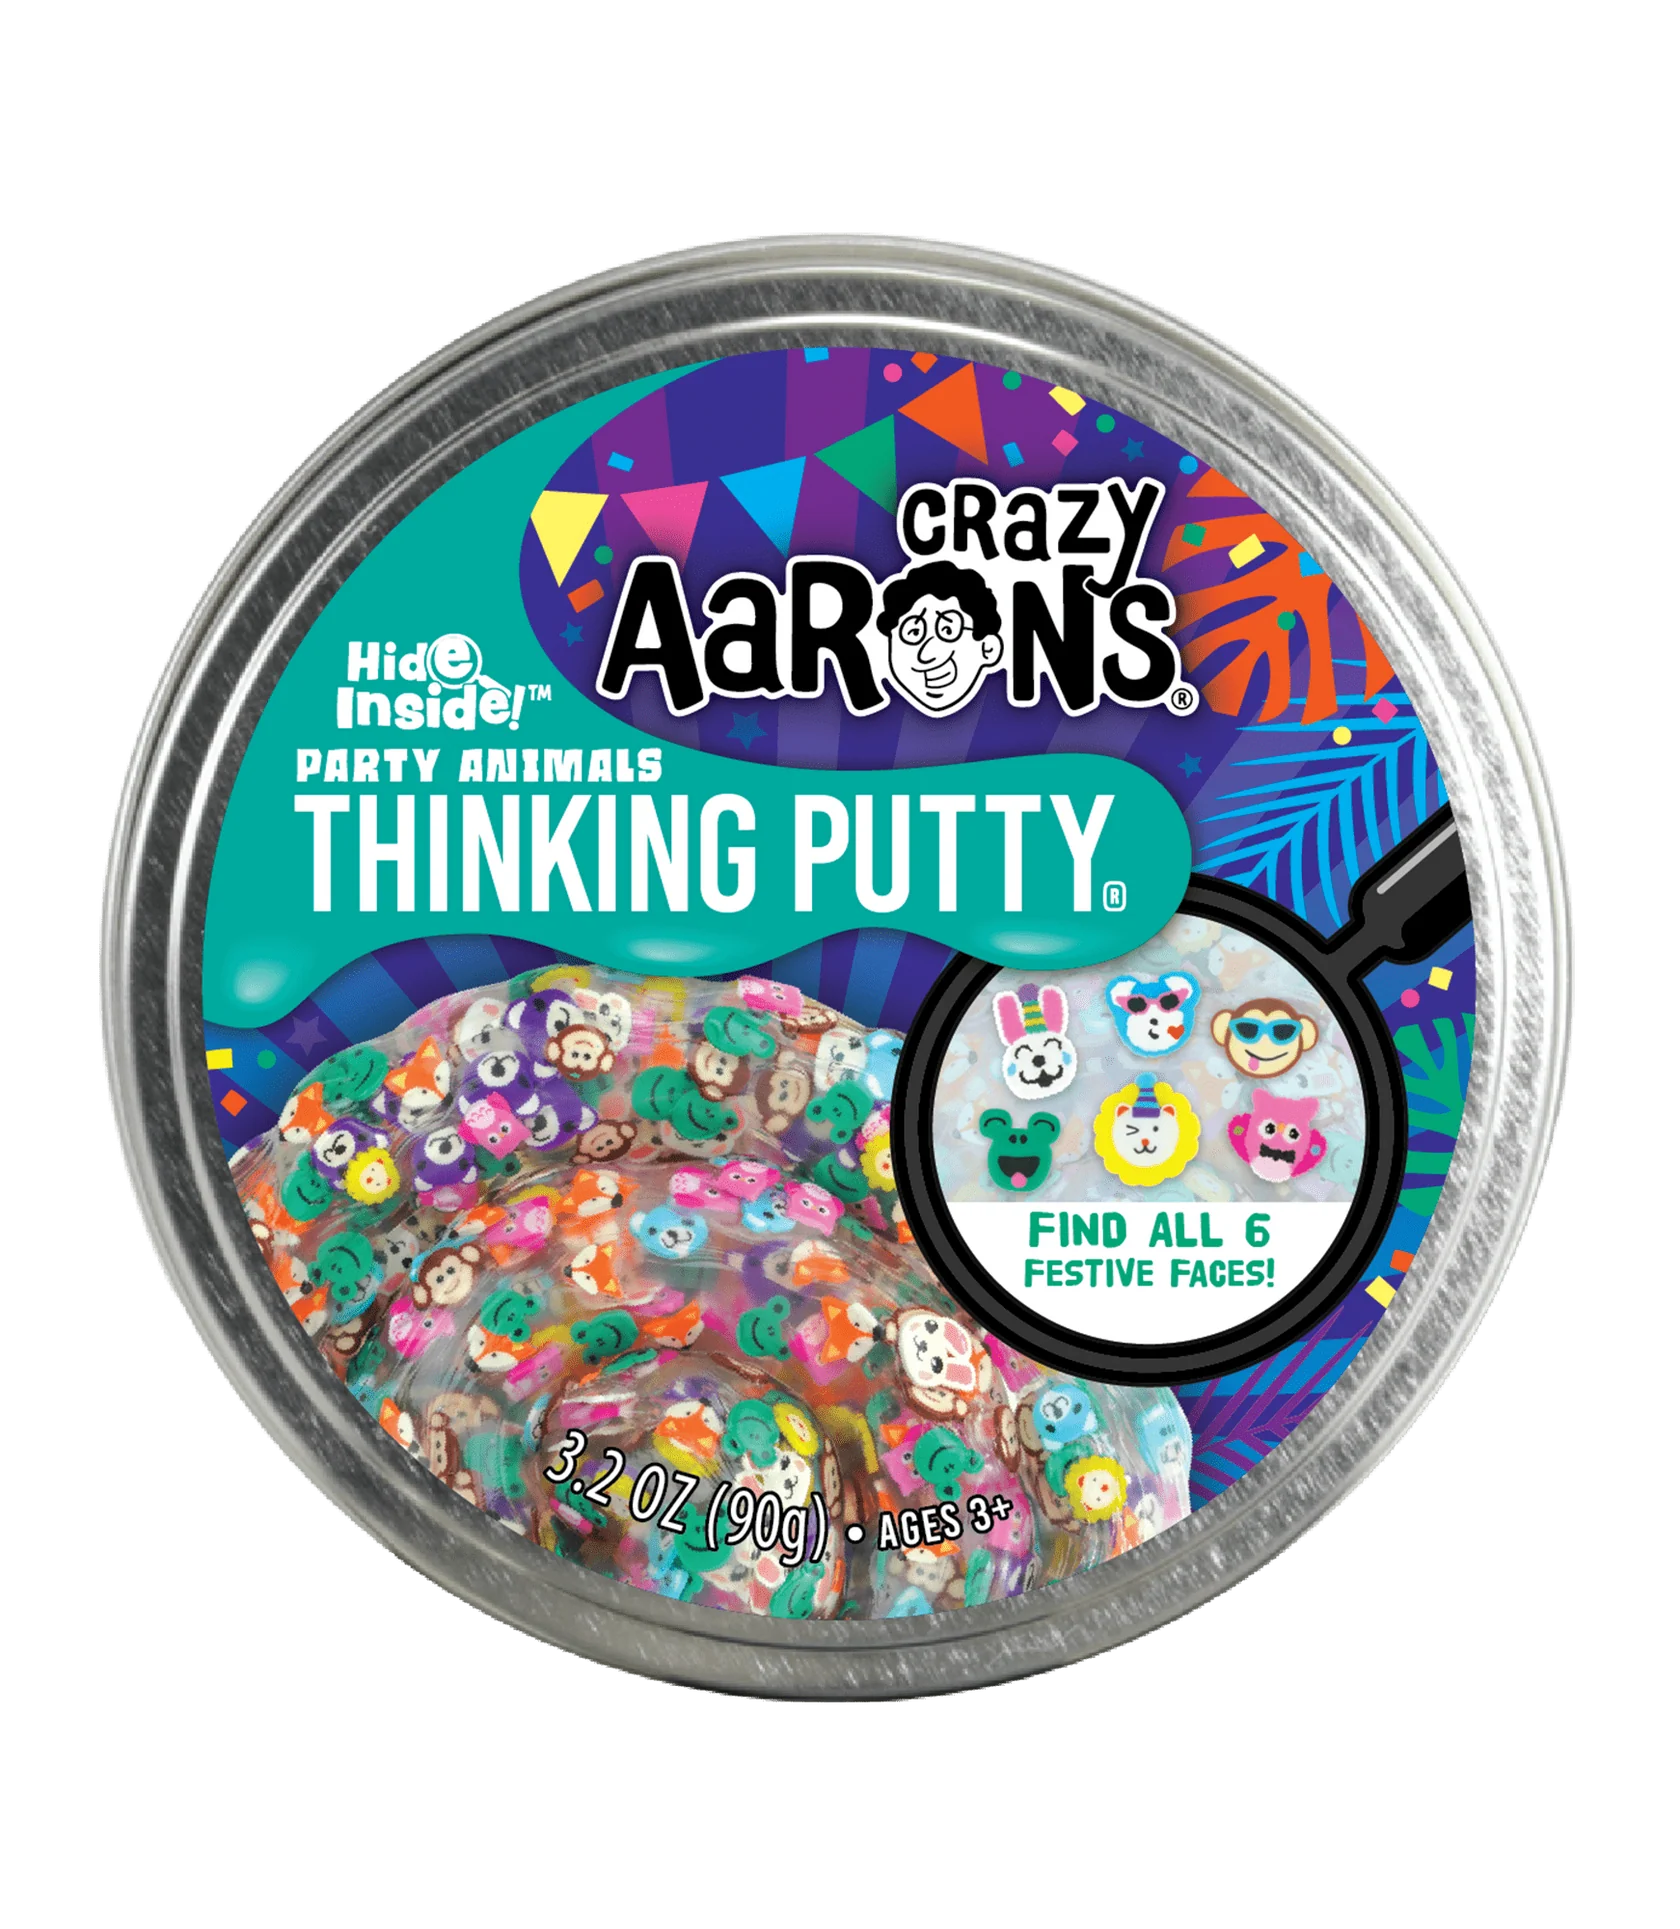 Crazy Arrons Hide Inside Party Animals Putty